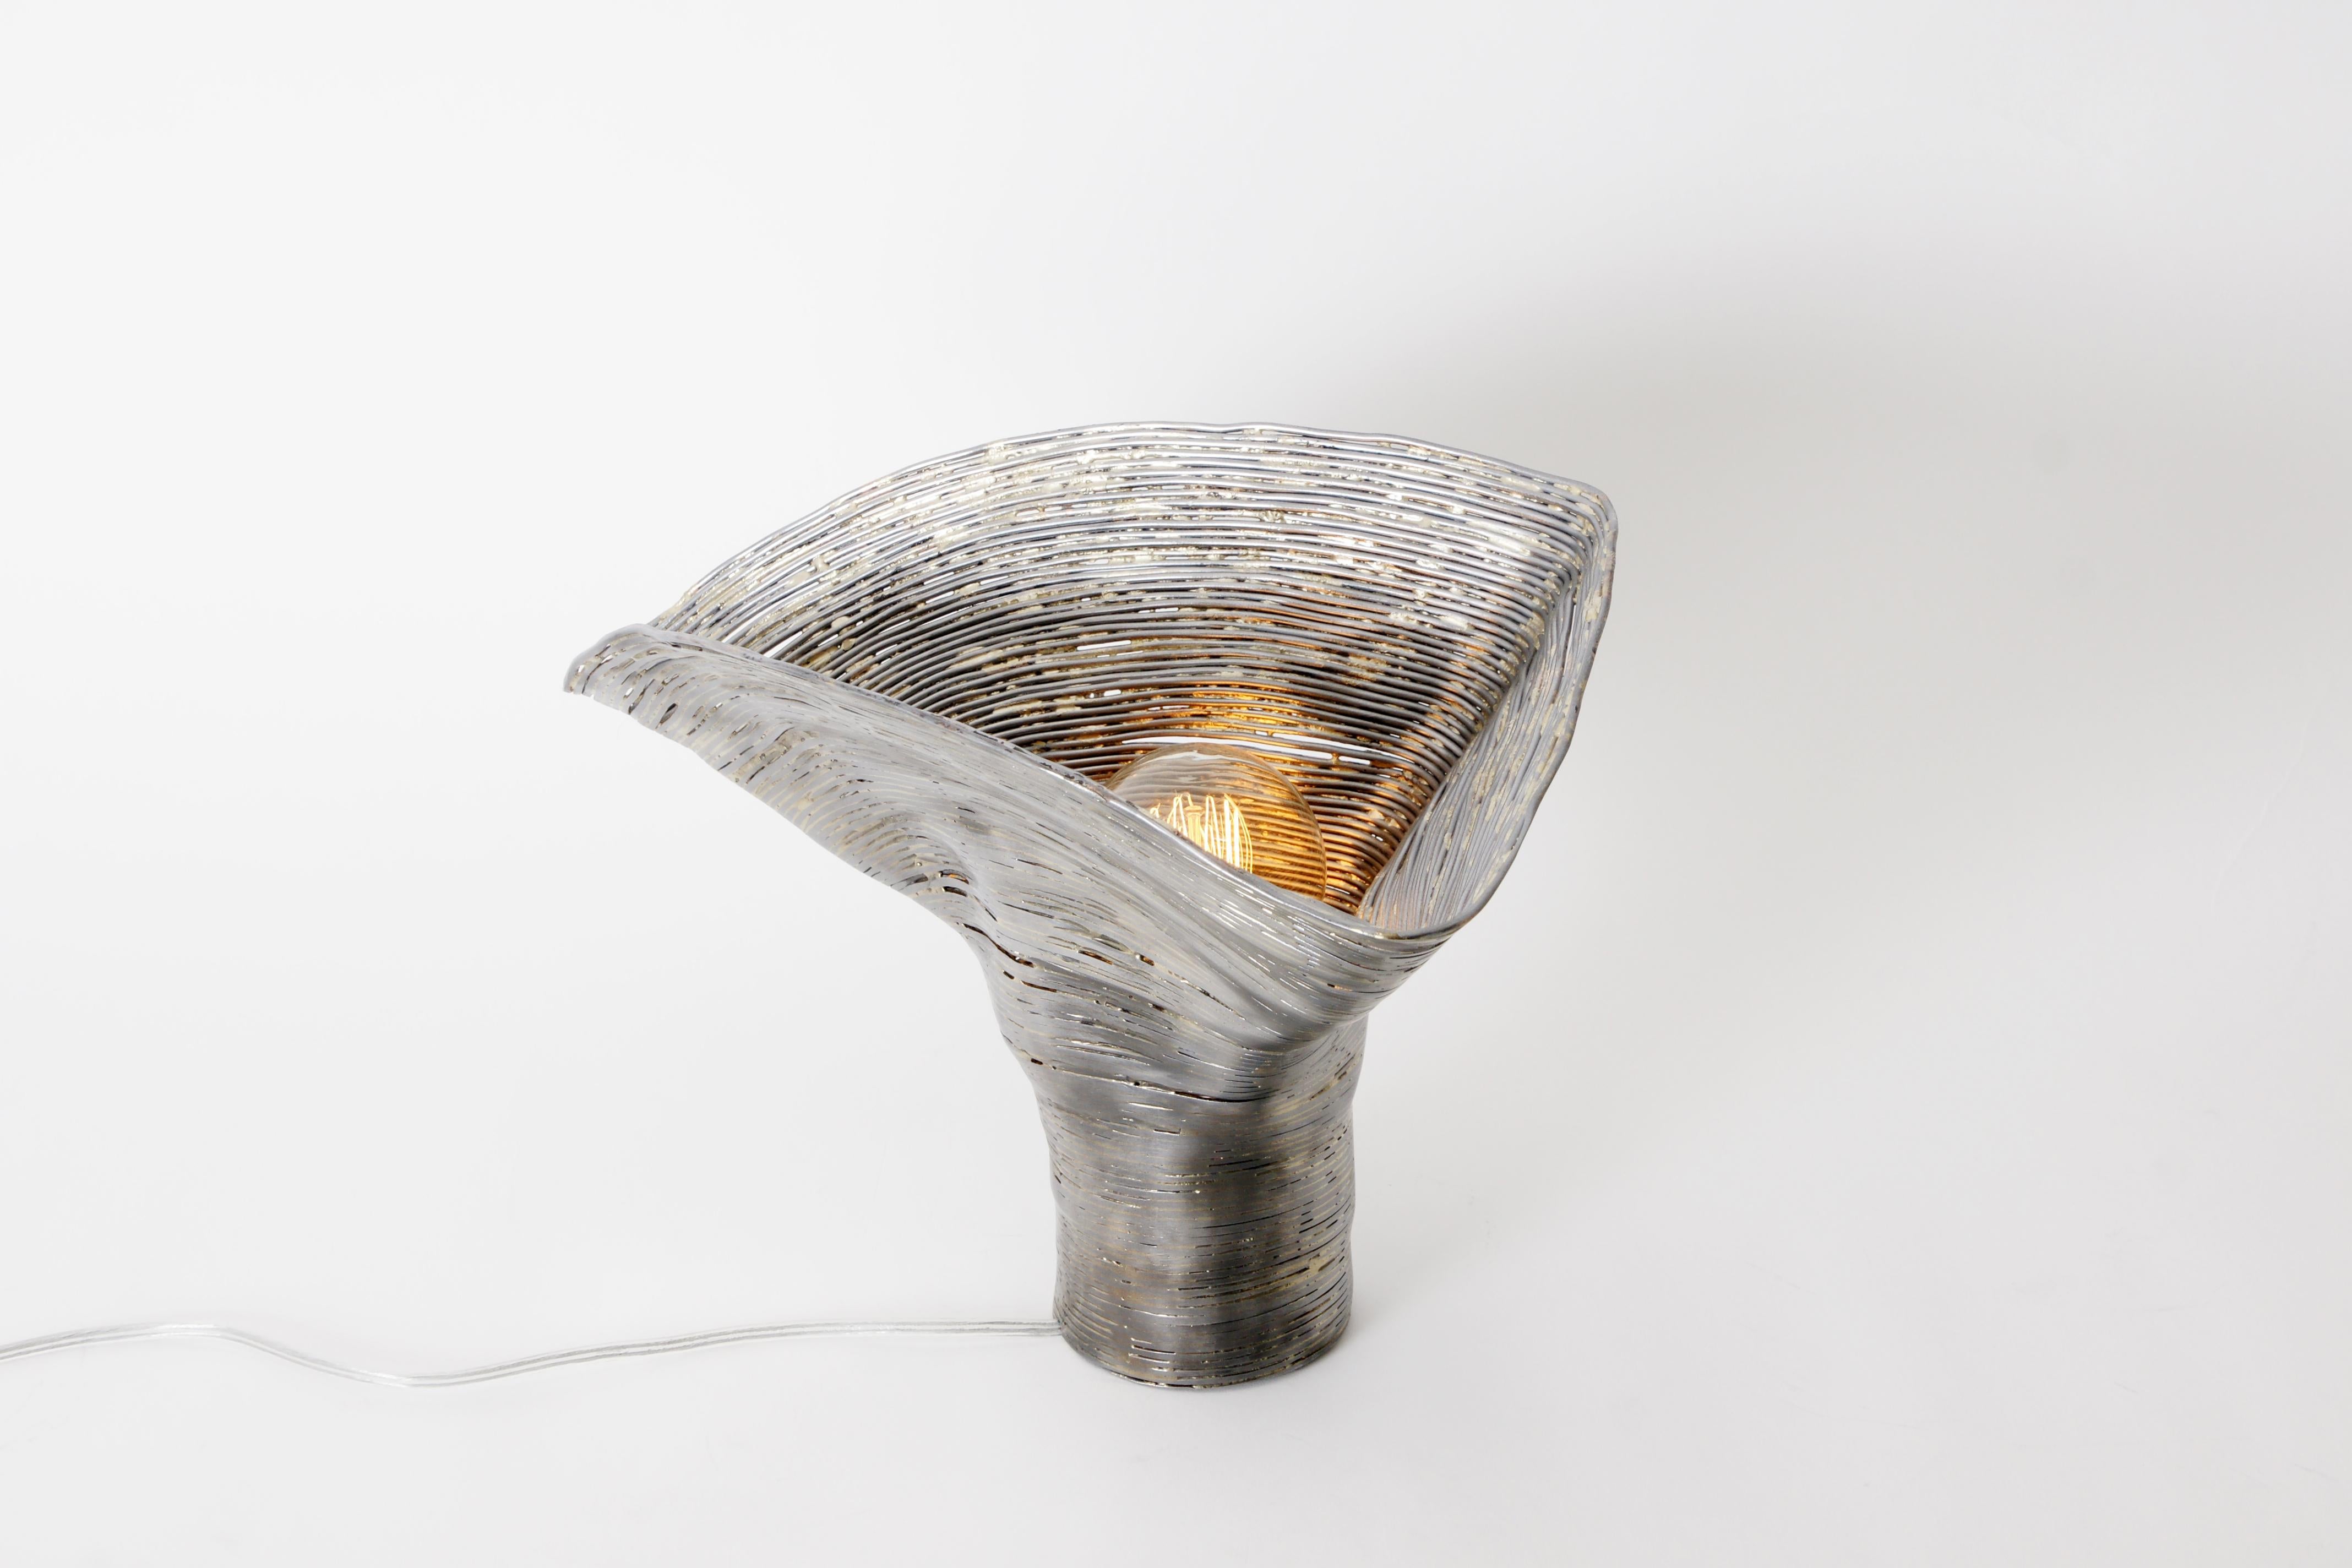 Wrap Alder table light by Johannes Hemann
Materials: Steel wire, brass
Dimensions: height 30cm, Ø 31cm

‘wrap, the series of objects by German designer Johannes Hemann examines the shells of things remaining after their disappearance. For this